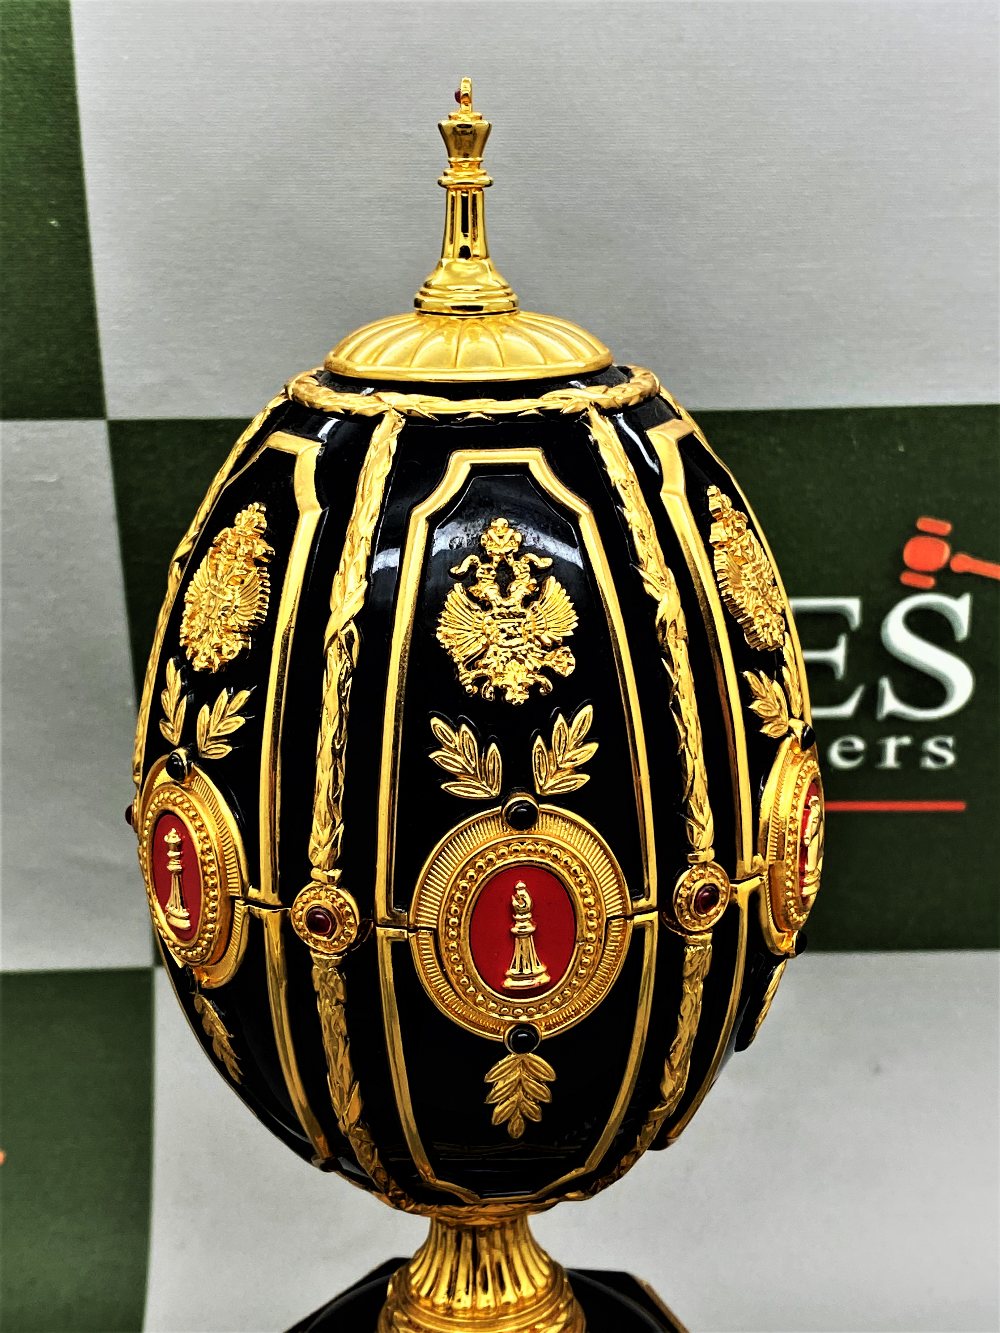 Faberge 24 Ct Gold "The Imperial Jewelled Egg Chess Set" - Image 3 of 6